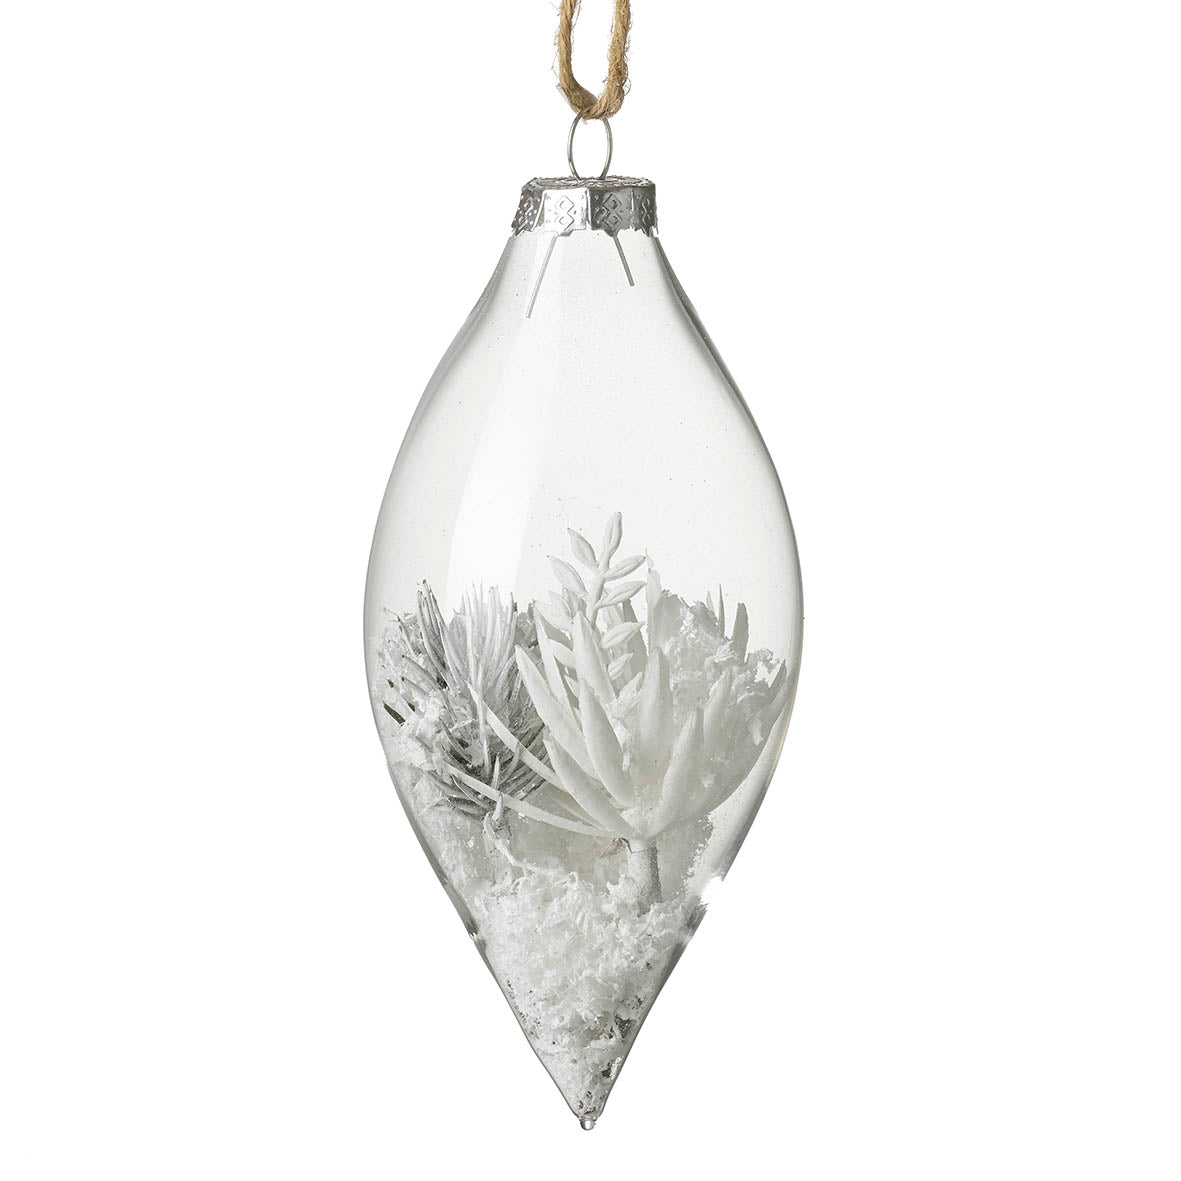 Snowy Pine Filled Glass Droplet Bauble